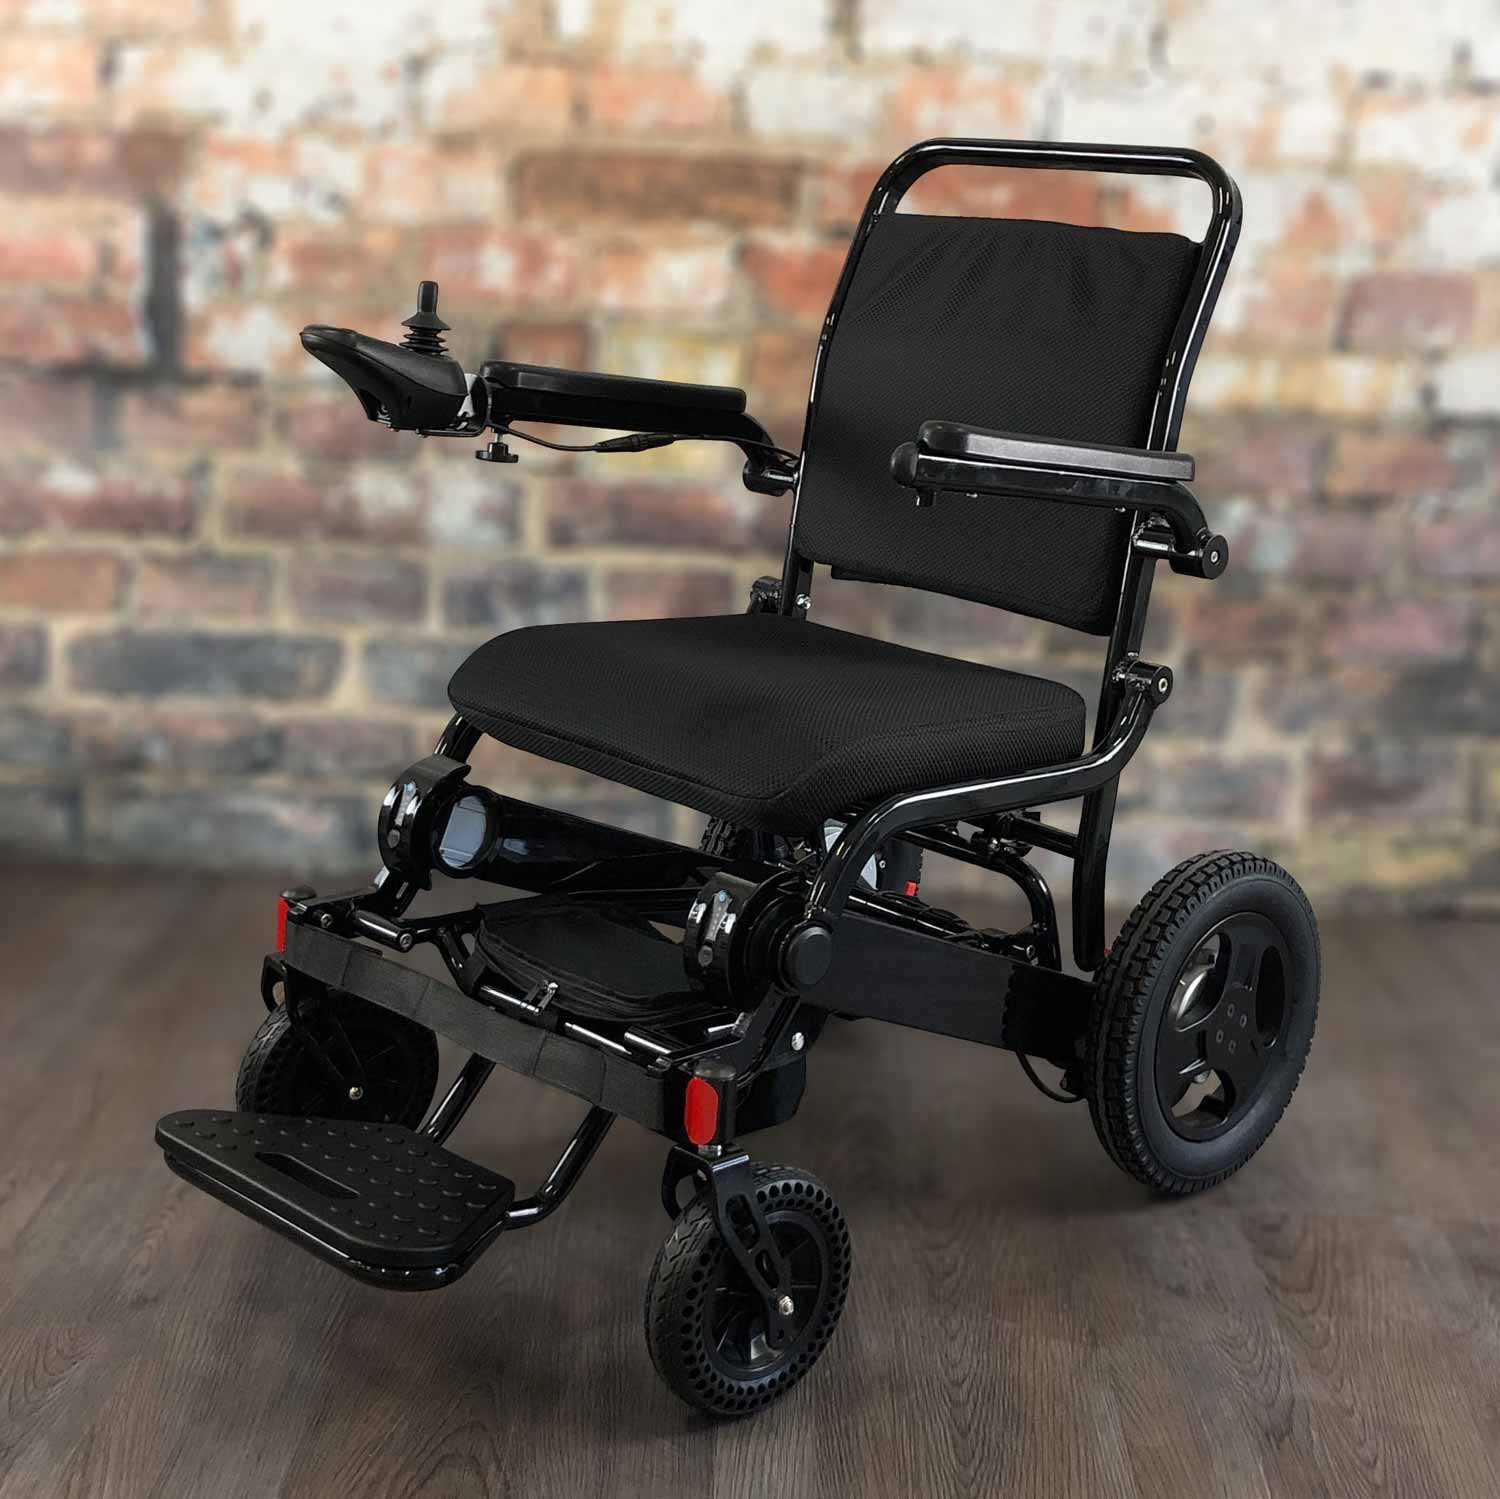 Power Wheelchairs  Electric Wheelchairs - Shop Our Full Line of